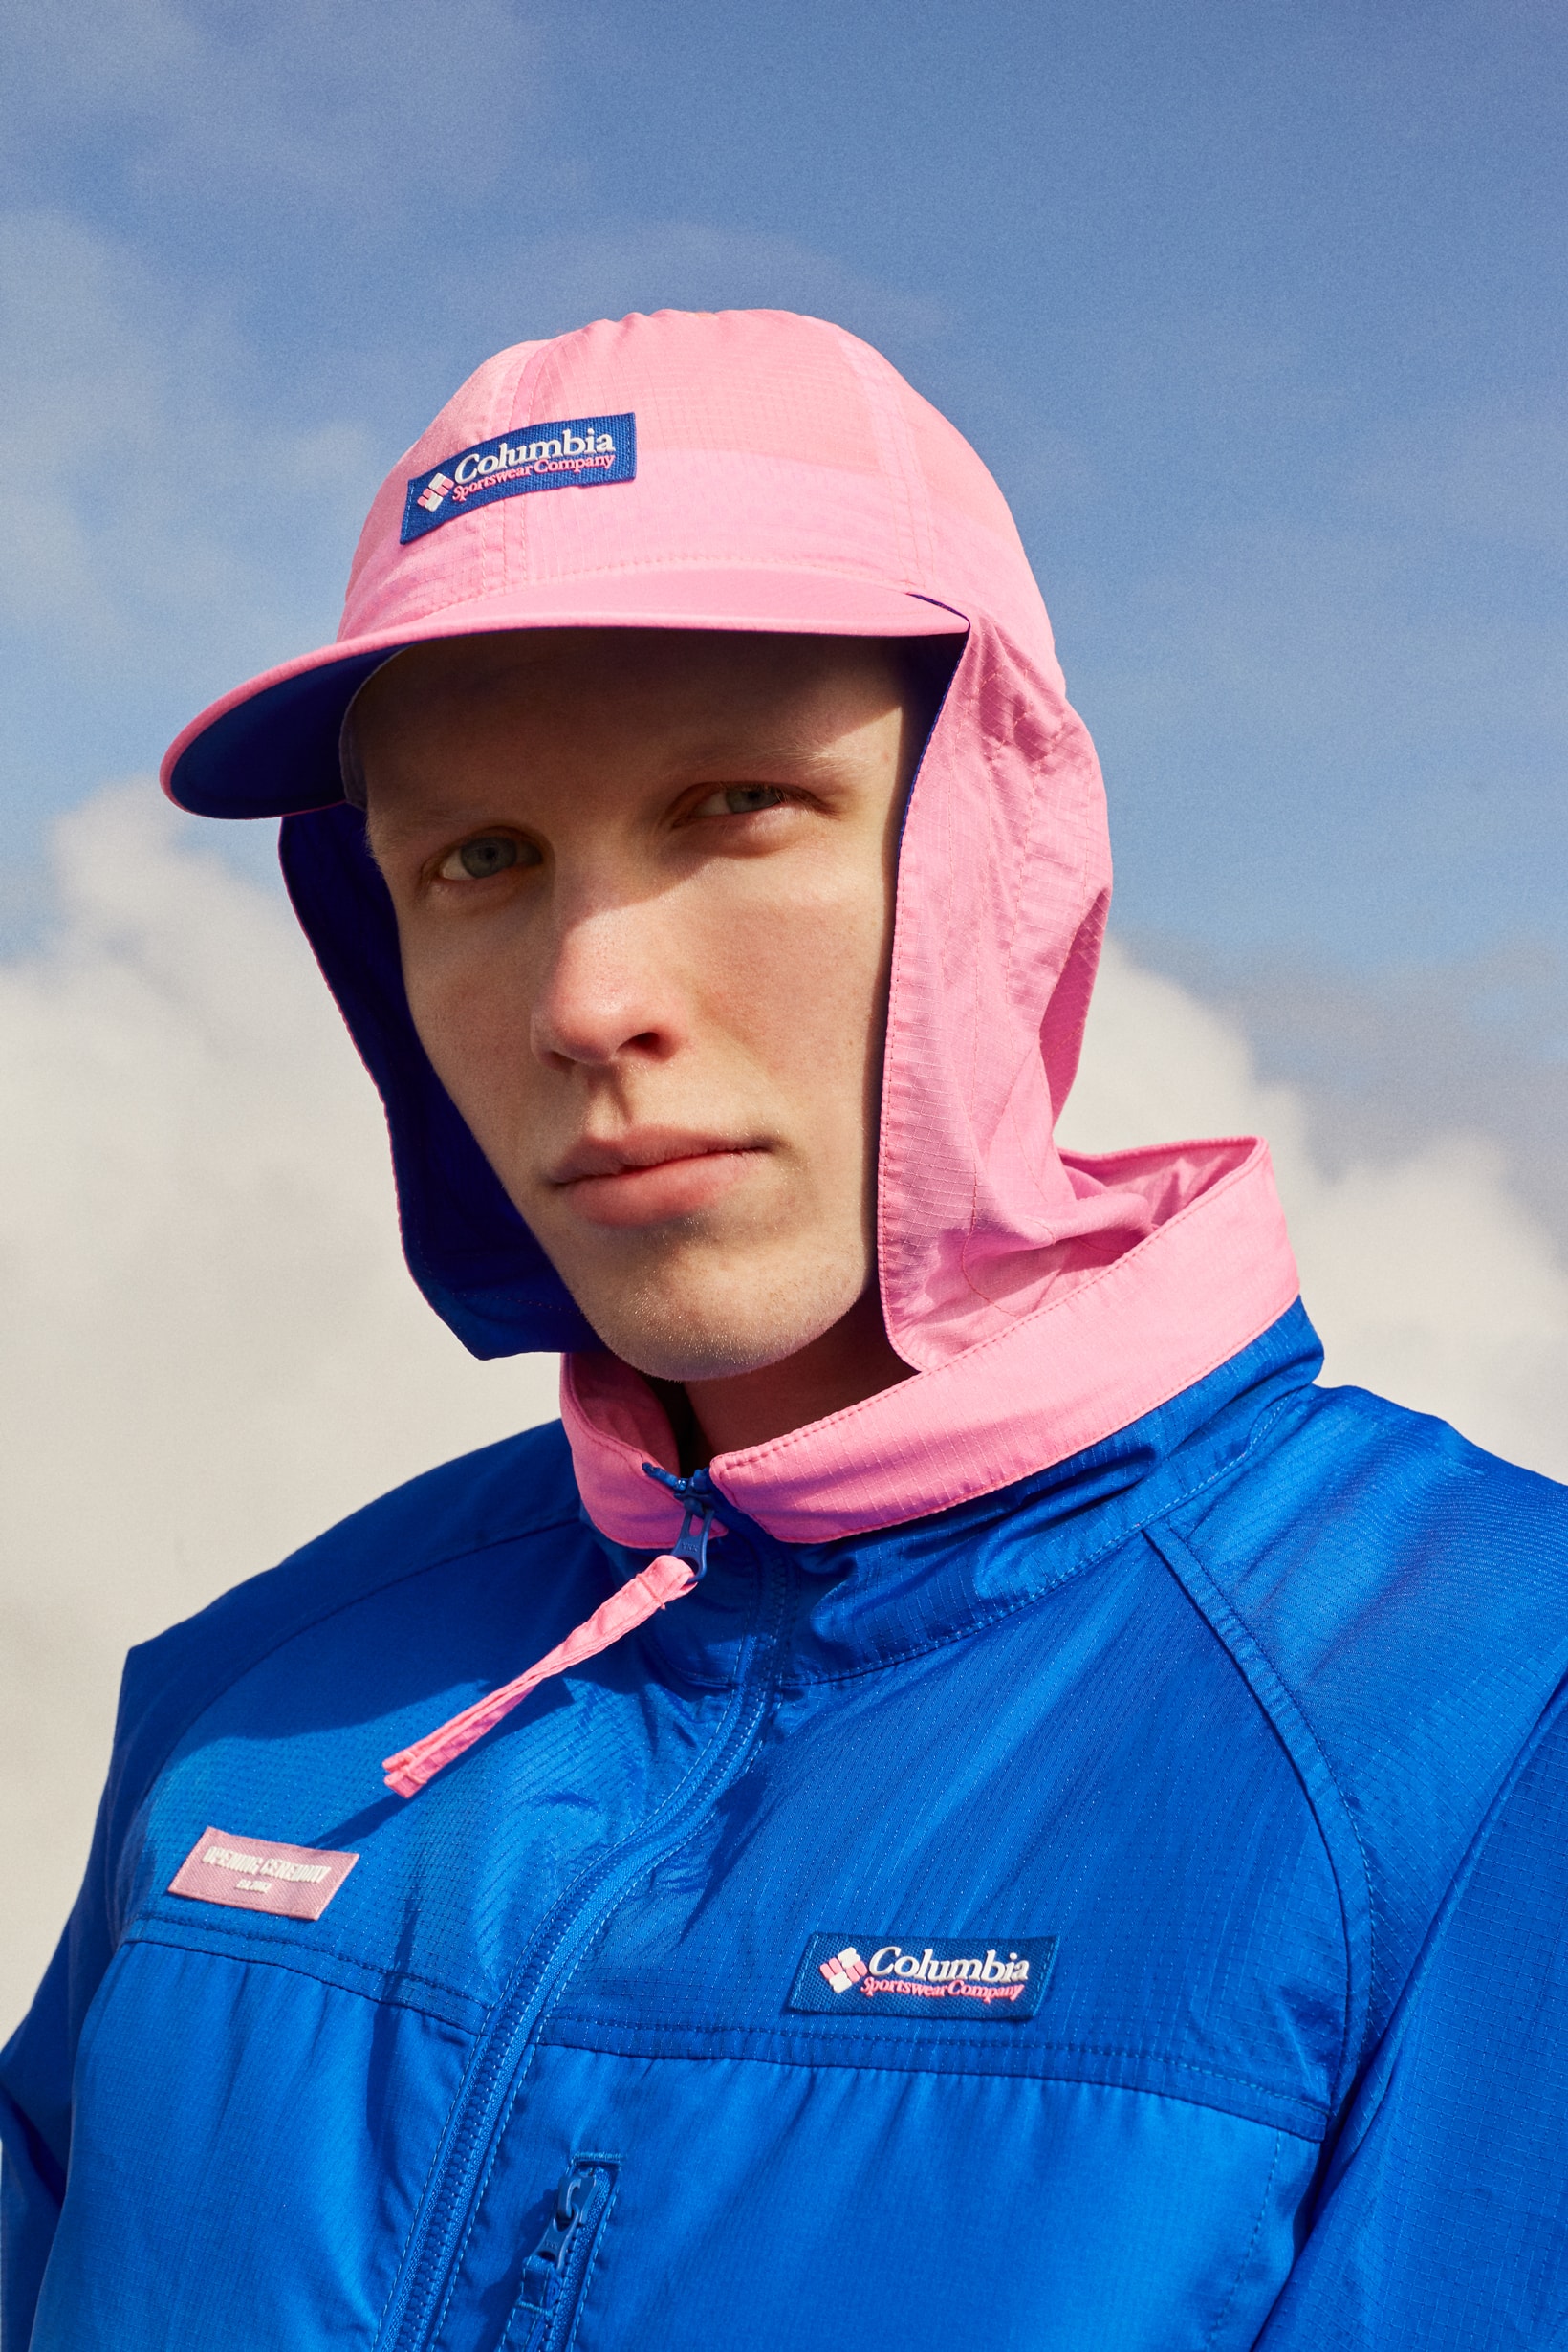 Opening Ceremony x Columbia Spring 2019 Capsule Collection Jacket Hat Pink Blue